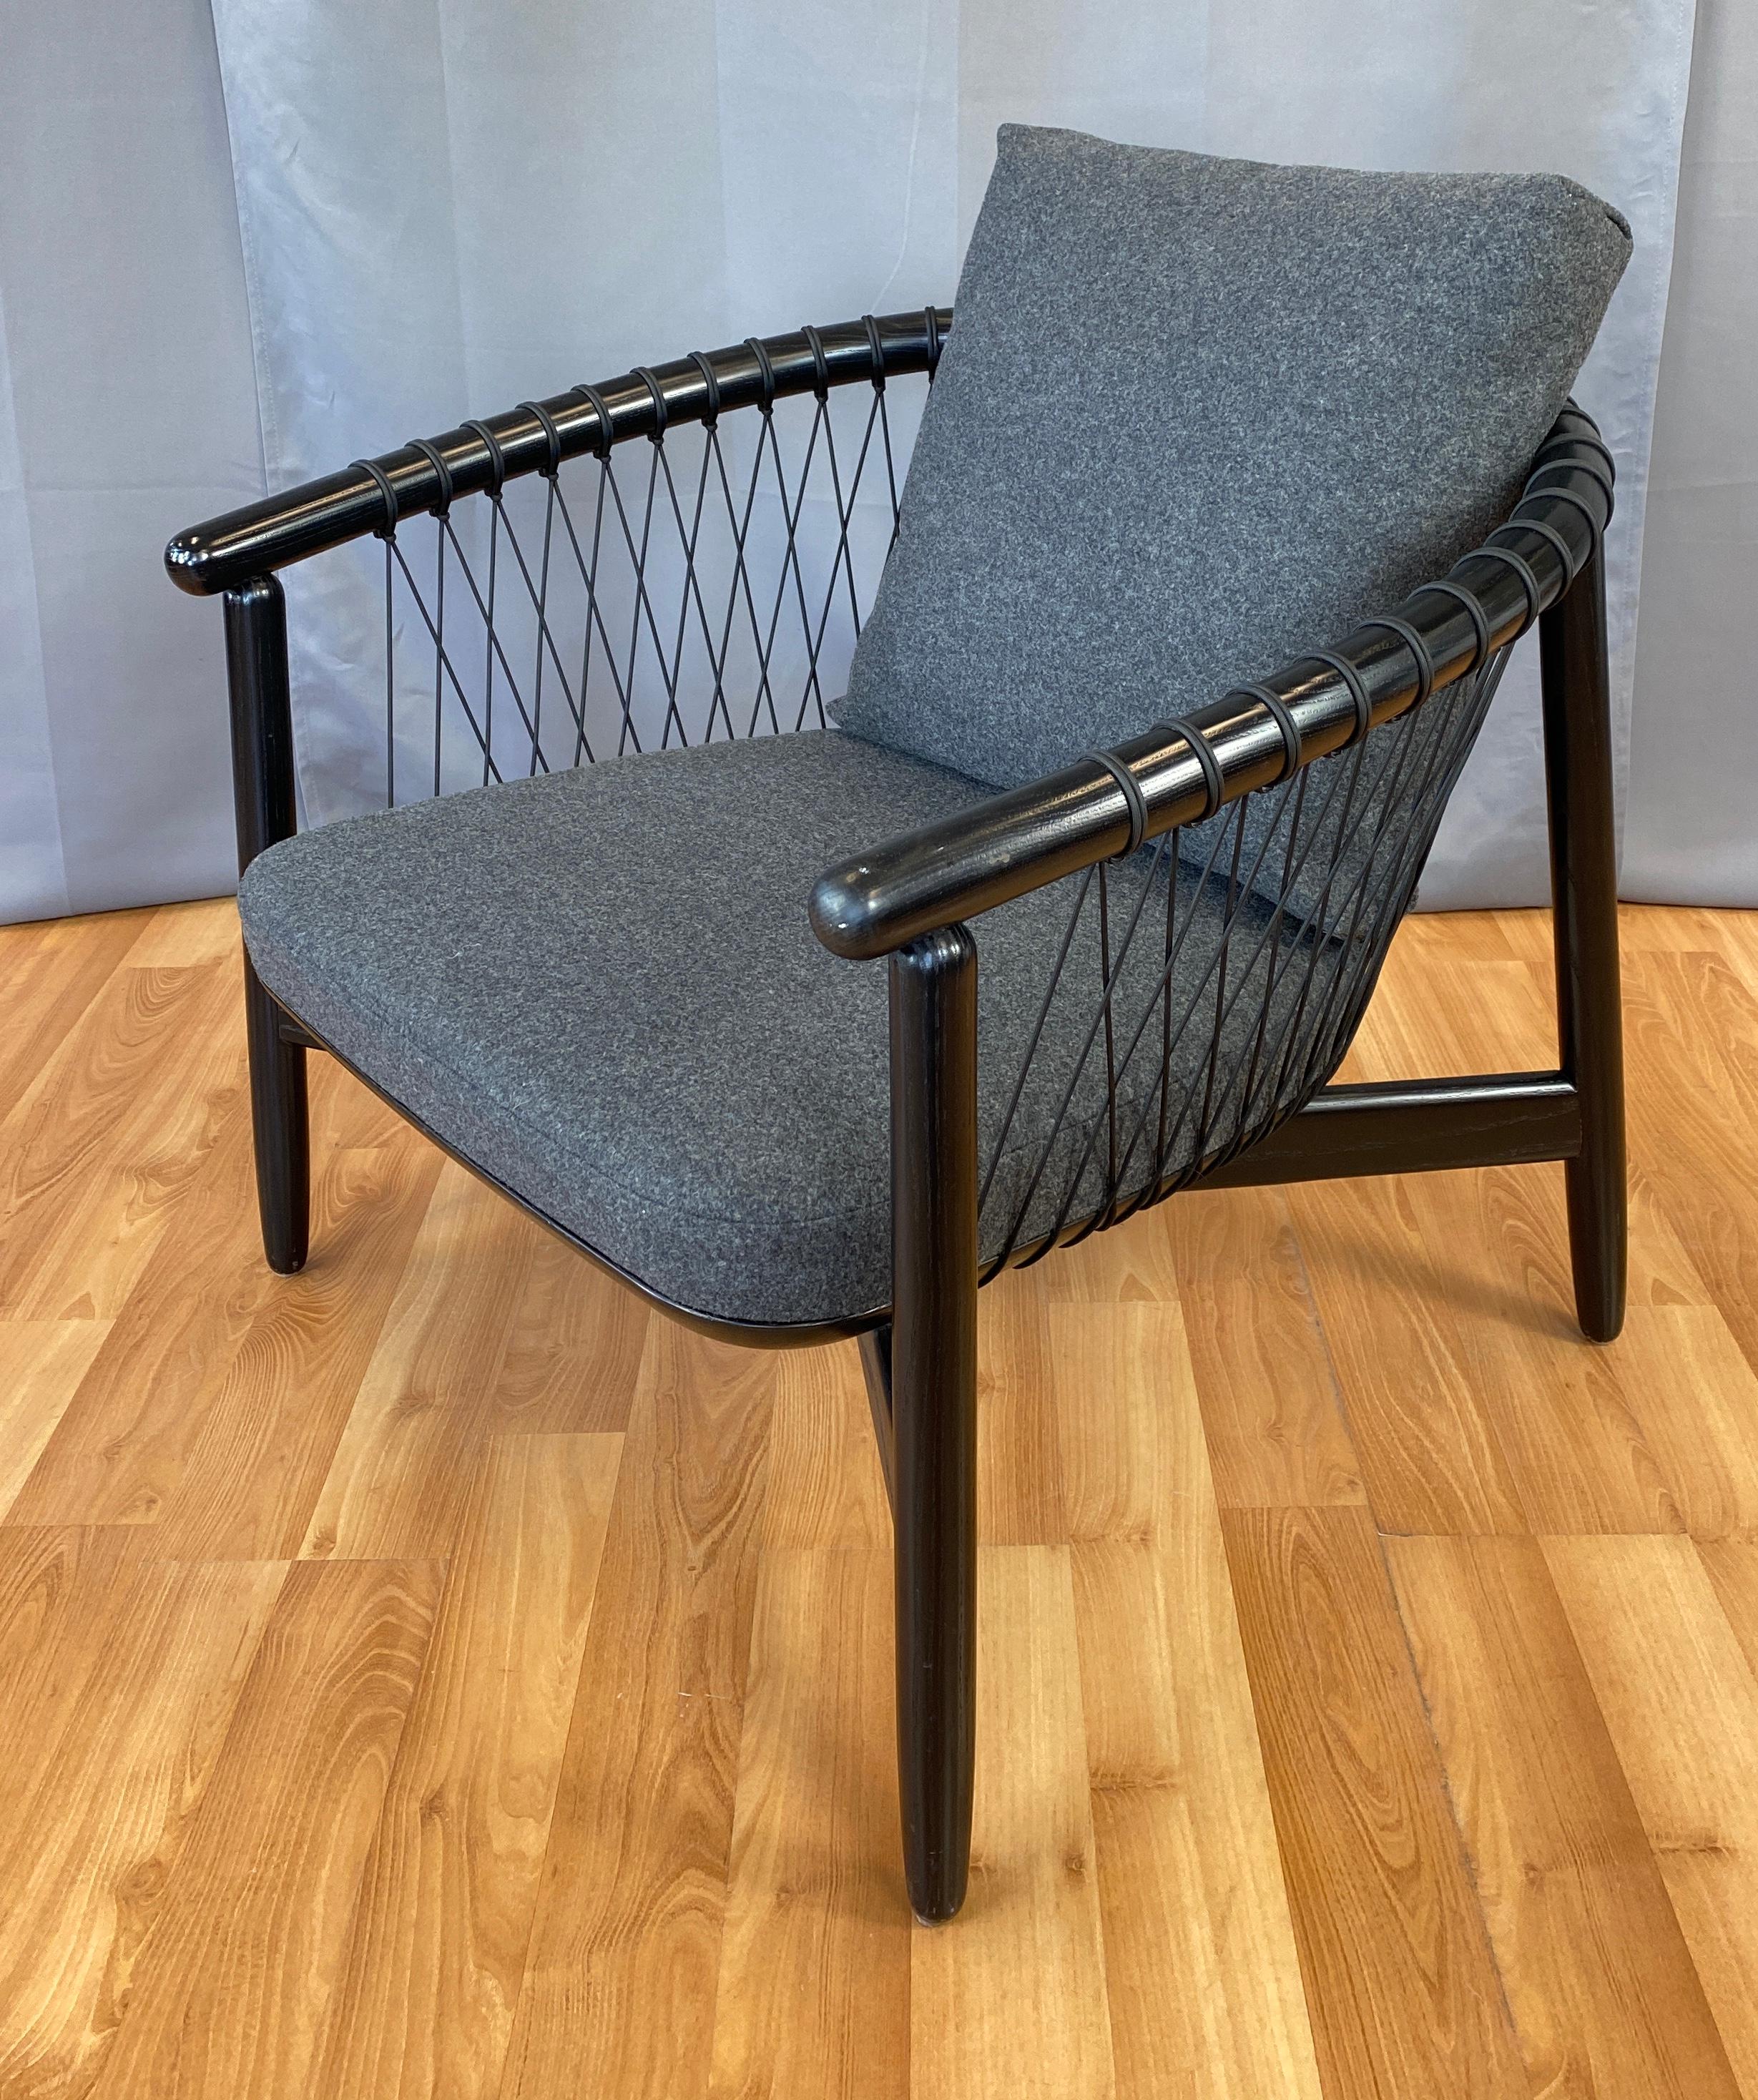 Offered here is a Crosshatch chair designed by Eoos for Geiger a Herman Miller company.
Frame and parachute cords are black, upholstery is a grey/black wool.

From Herman Miller's web site: 
The feeling of being enveloped in a protective nest